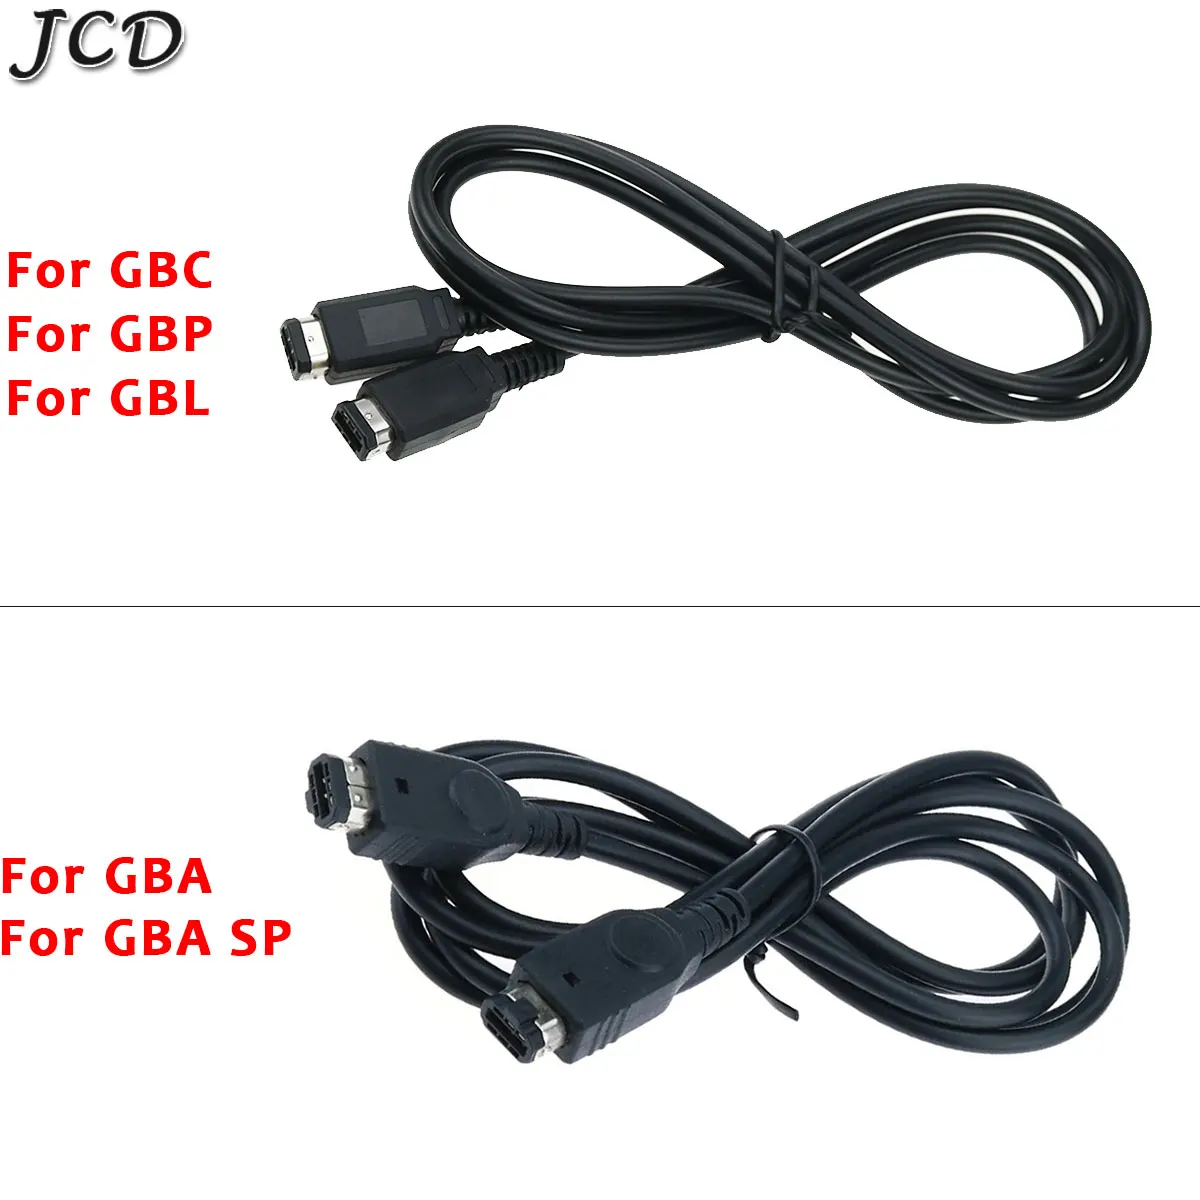 

JCD 1.2m For GBA 2 player Line Online Link Connect Cable Link for GameBoy advance GBA SP for gameboy Color GBC GBP GBL